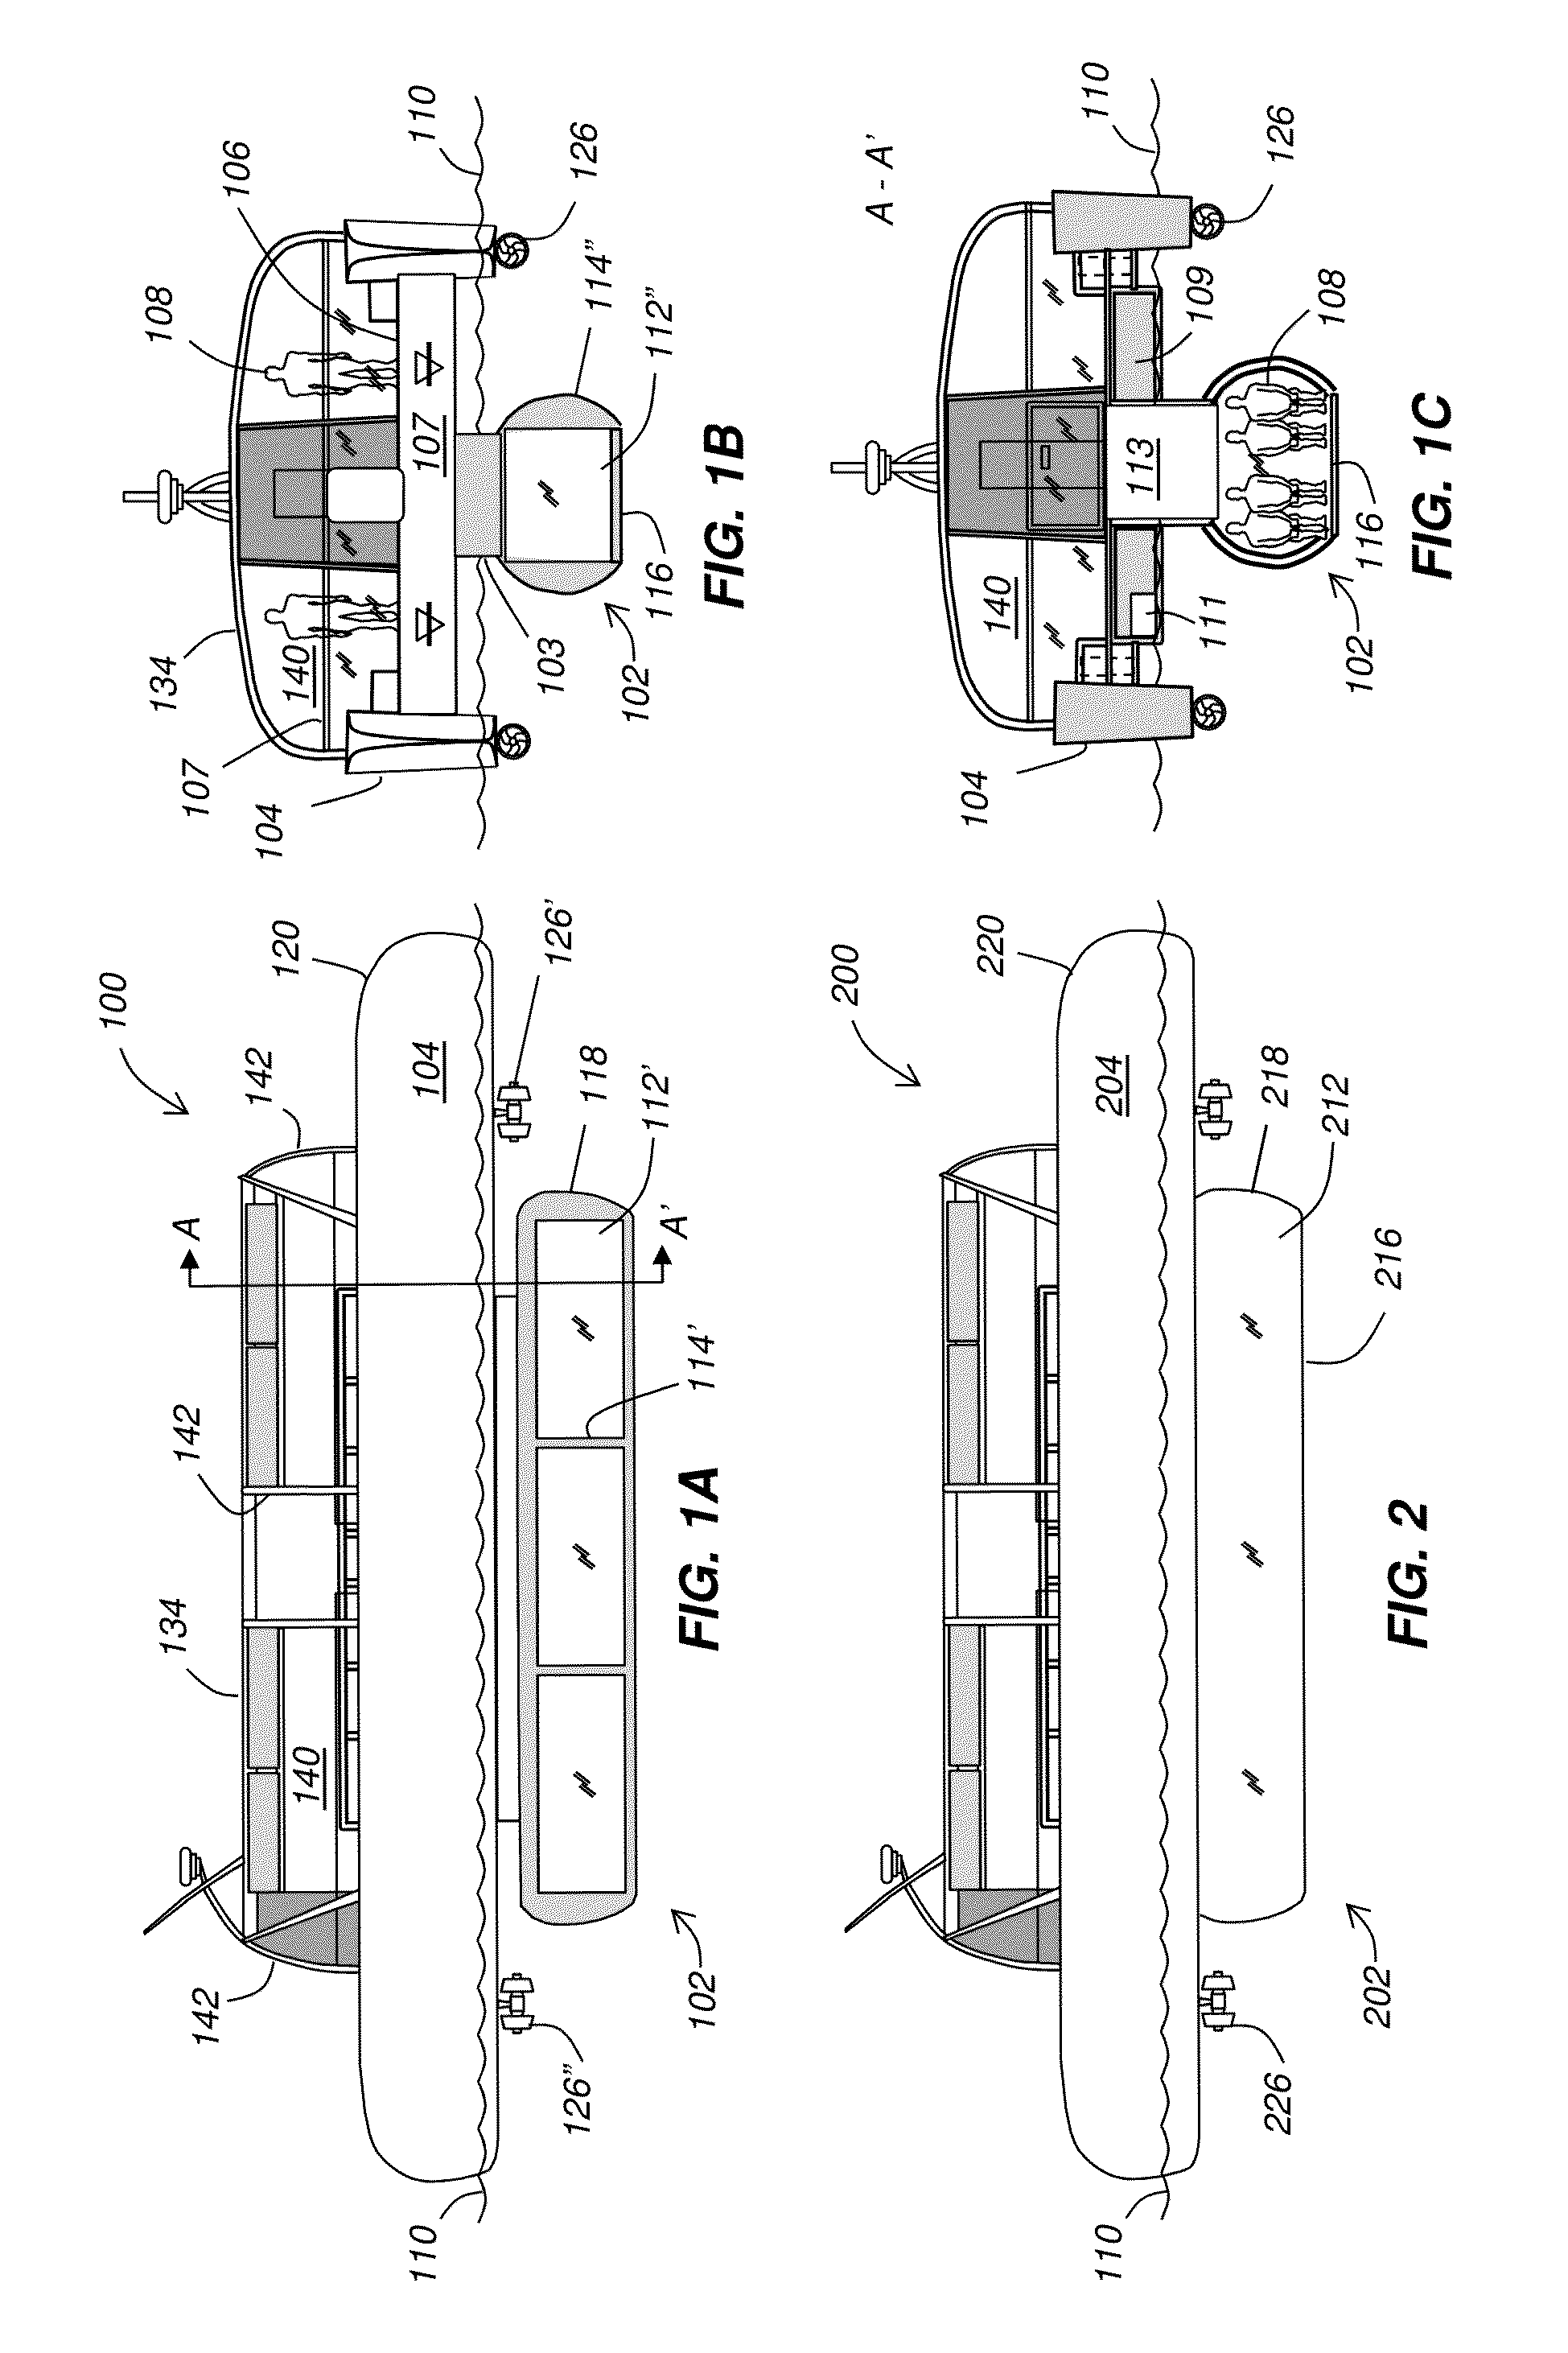 System and method for underwater observation